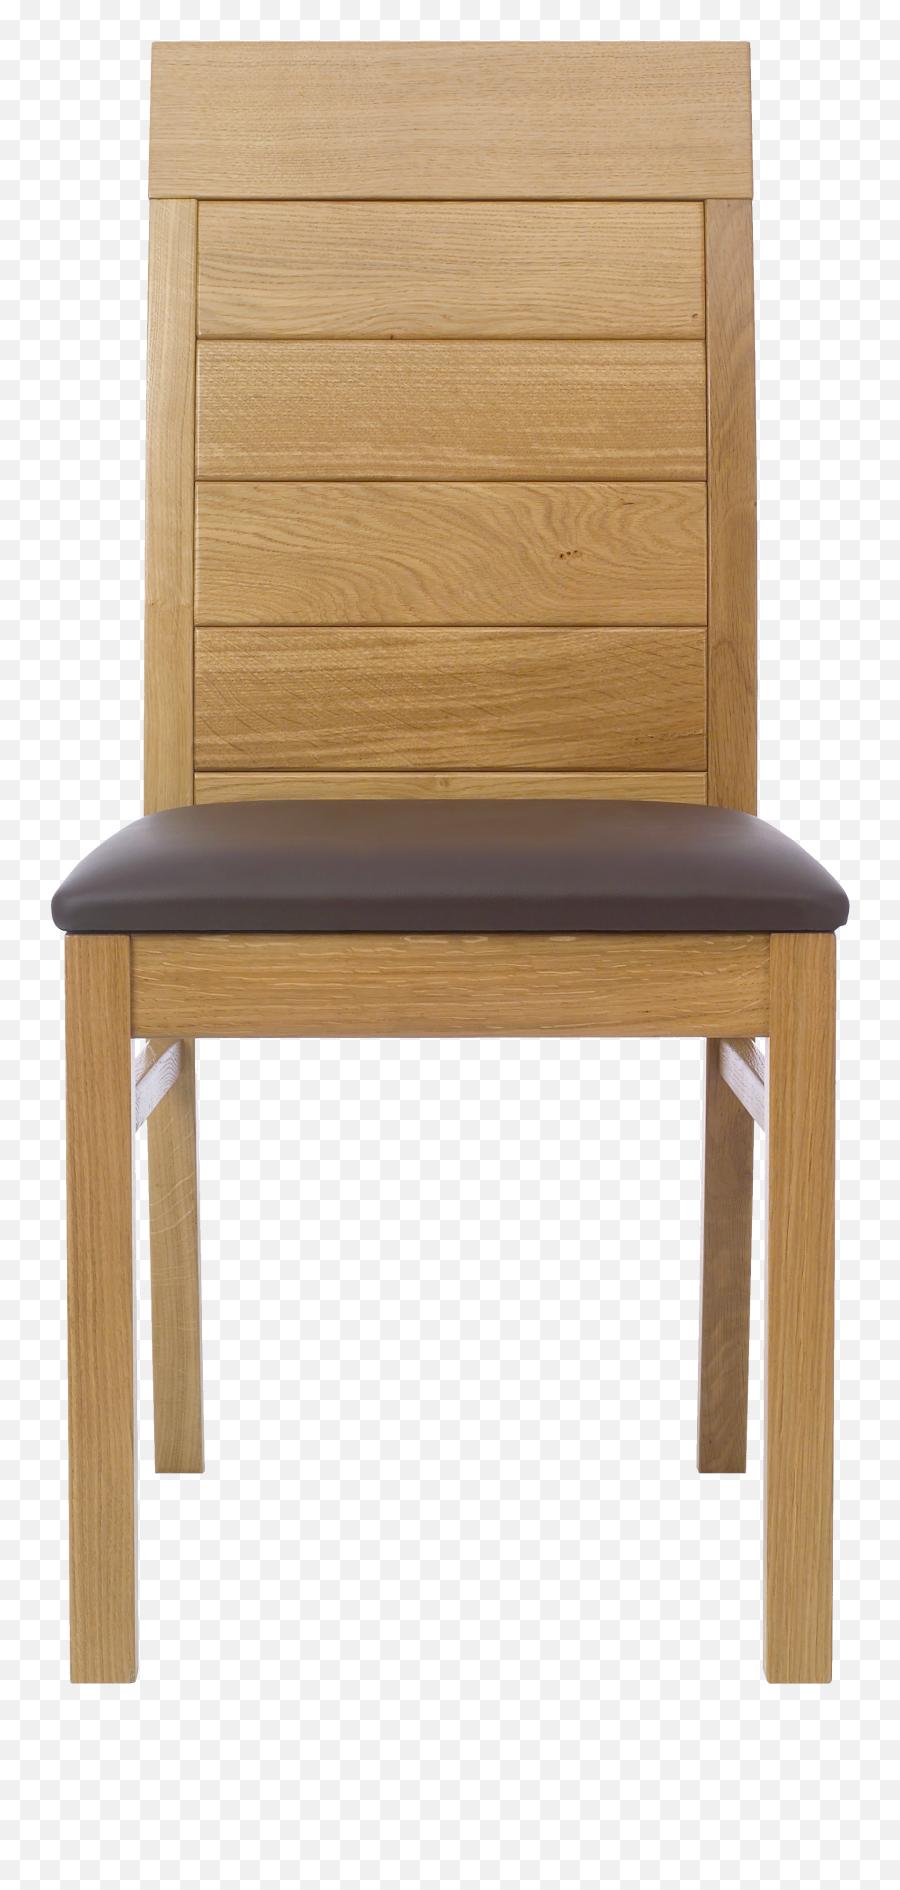 Chair Png Image - Transparent Wooden Chair Png,Chair Transparent Background